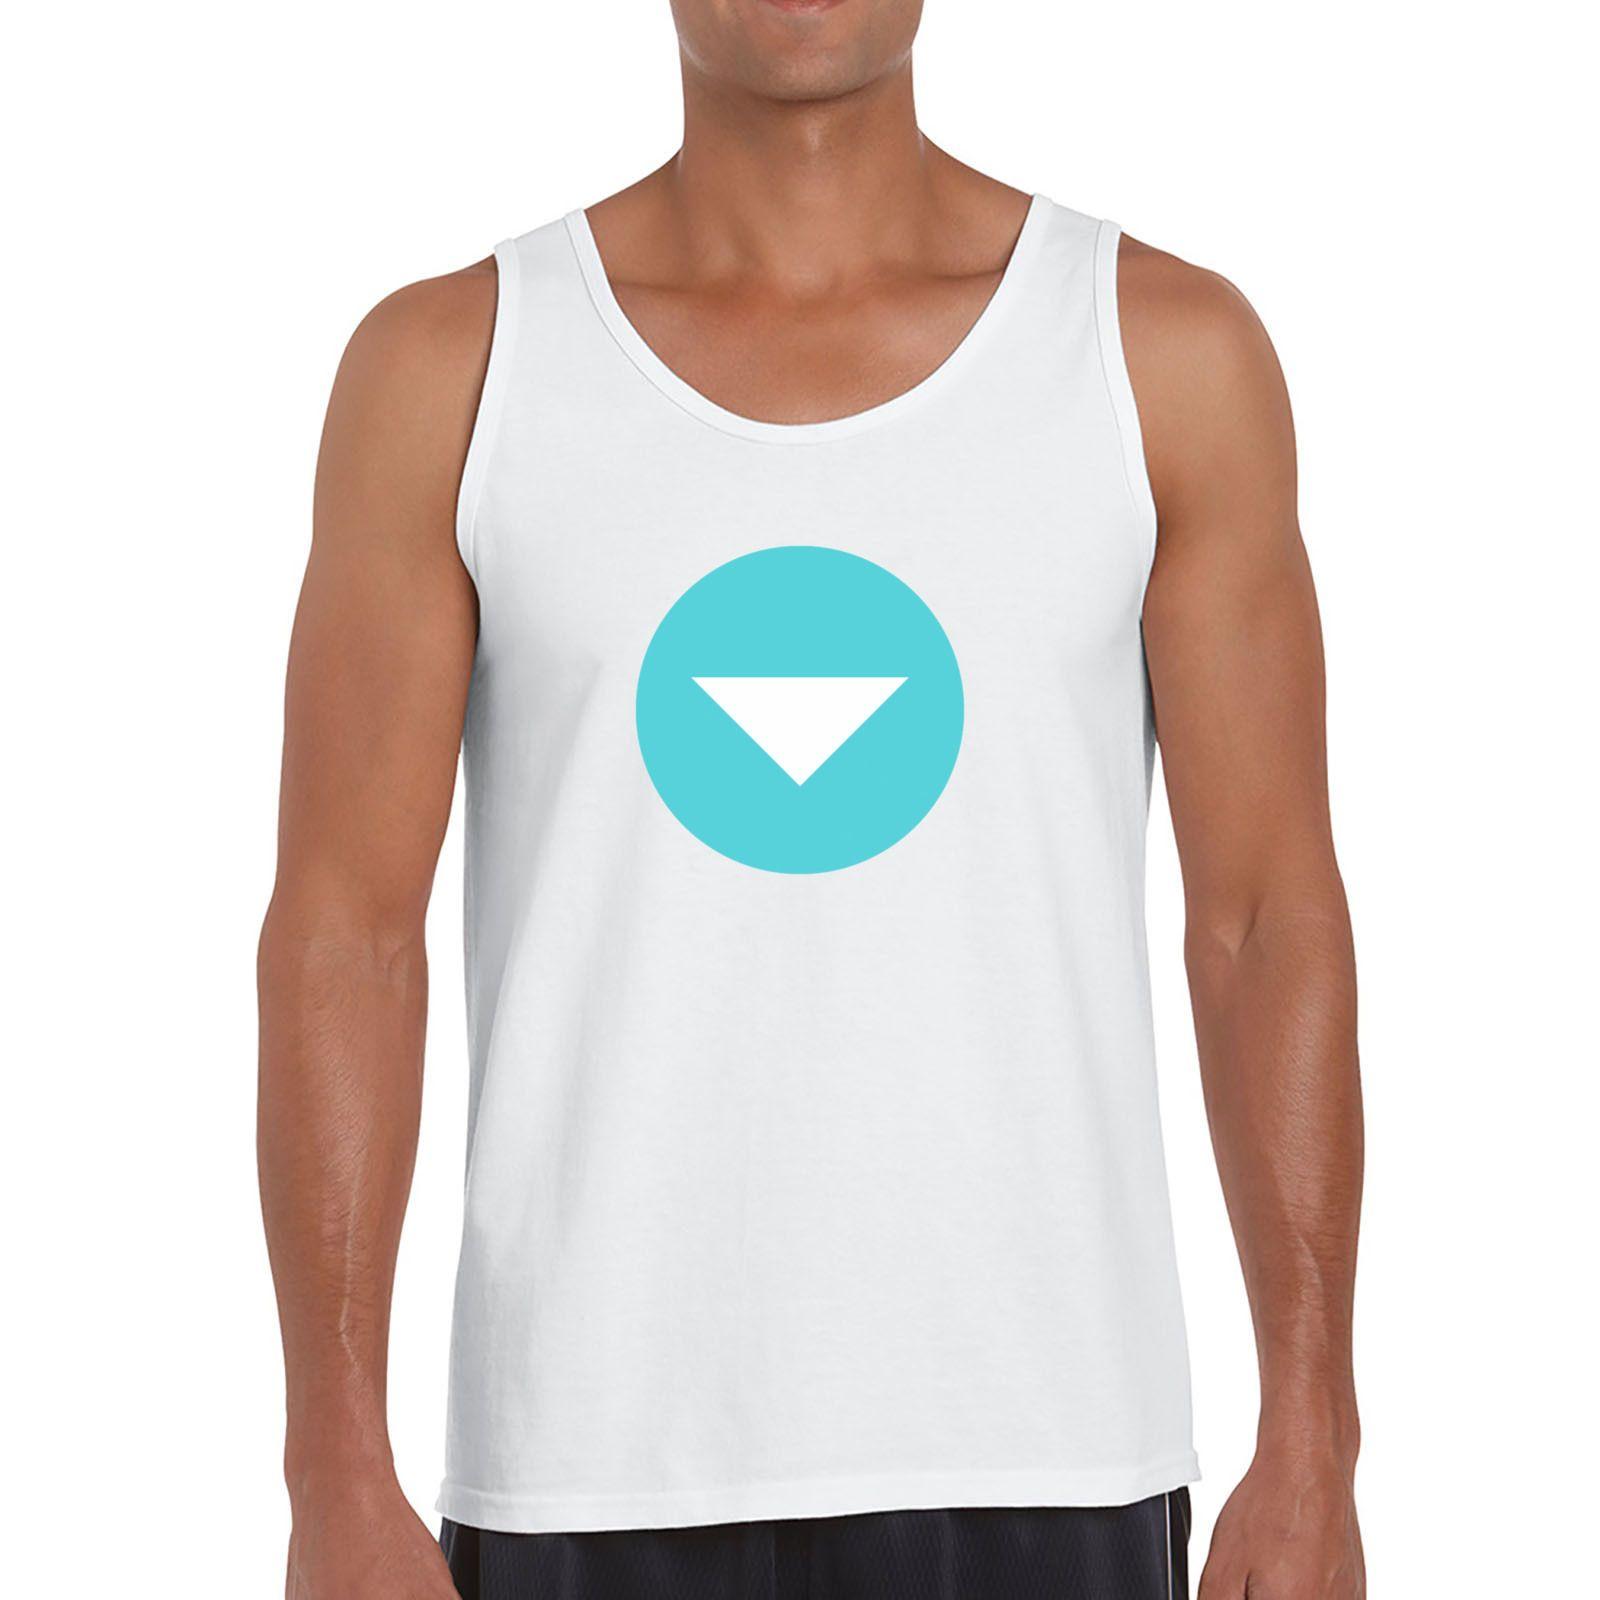 Red Triangle Clothing Logo - Emoji Down Pointing Small Red Triangle Mens Vest. Available in many ...